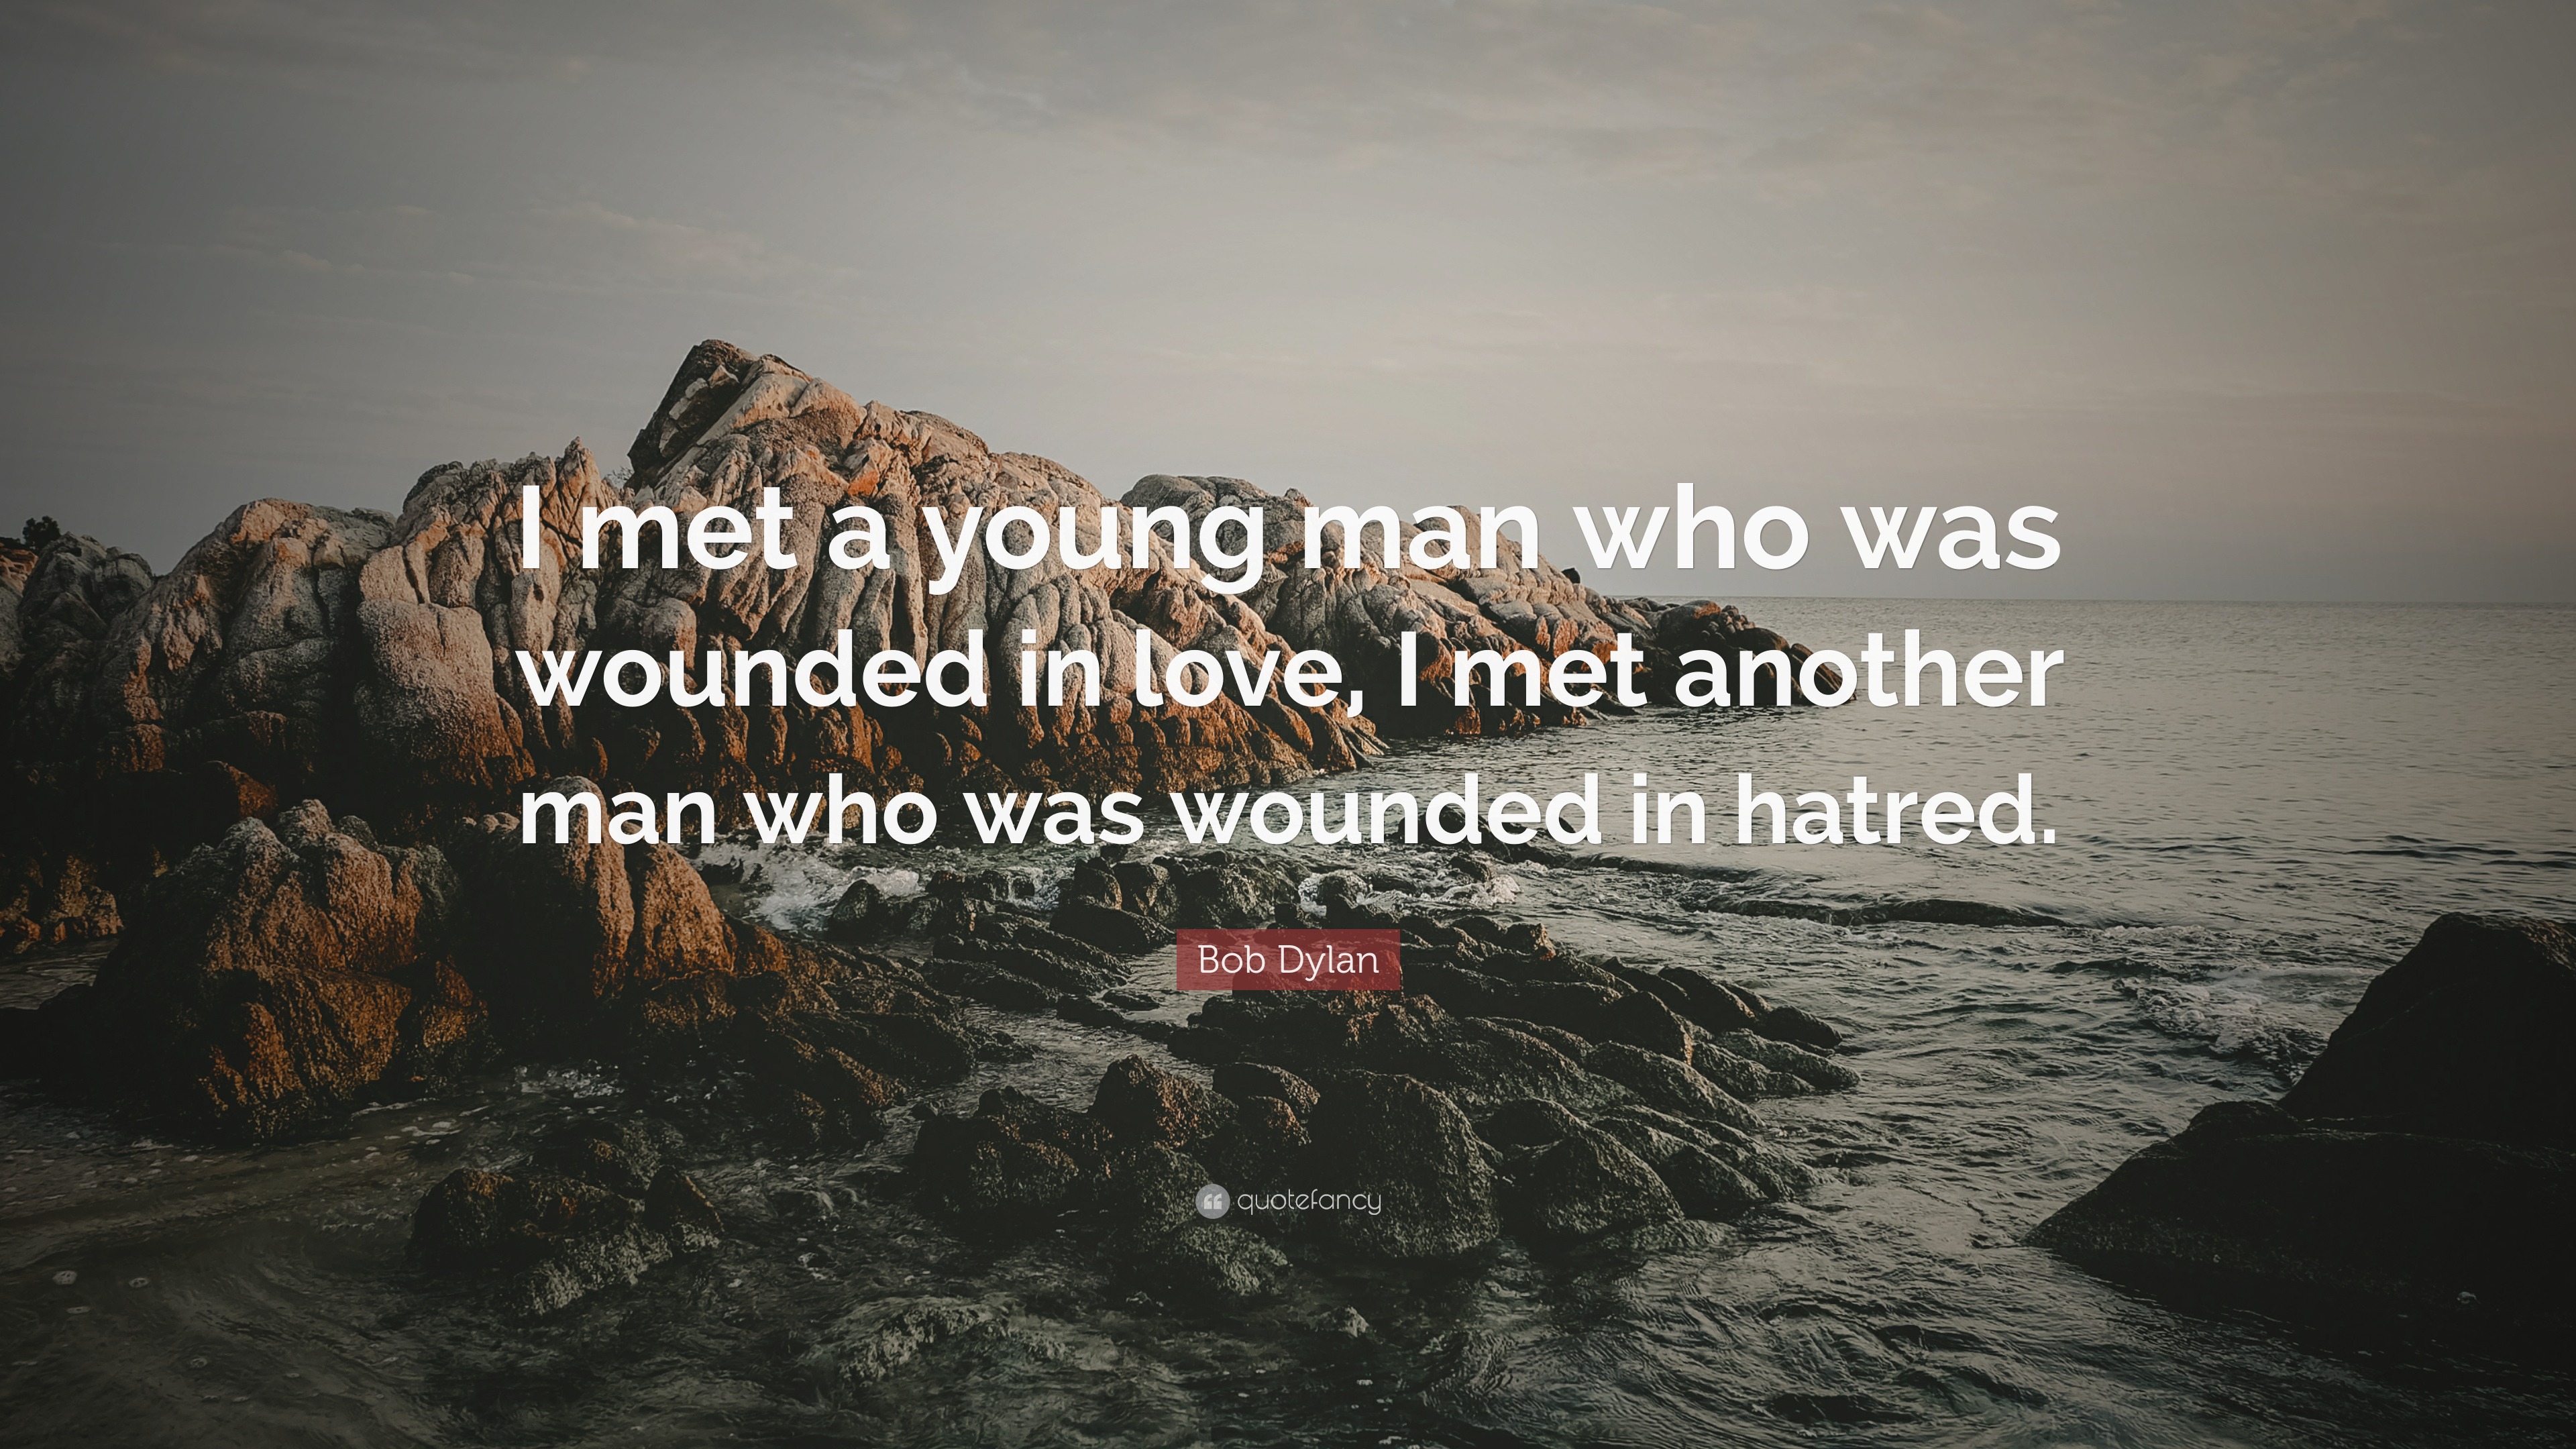 Bob Dylan Quote “I met a young man who was wounded in love